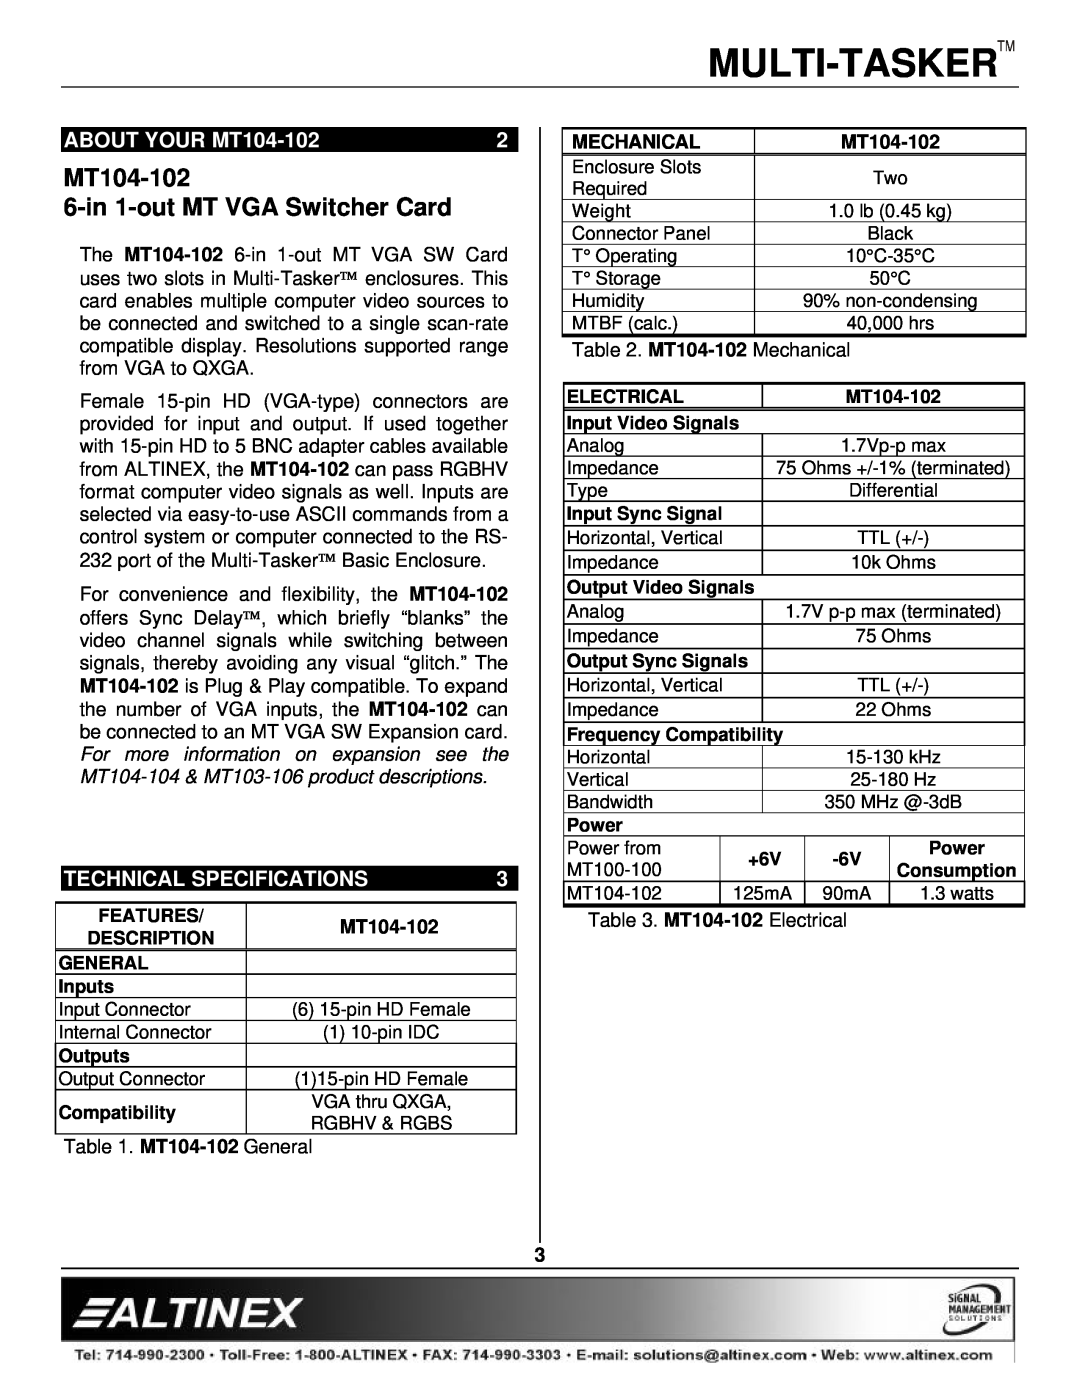 Altinex manual ABOUT YOUR MT104-102, Technical Specifications, Multi-Tasker, MT104-102 6-in 1-out MT VGA Switcher Card 